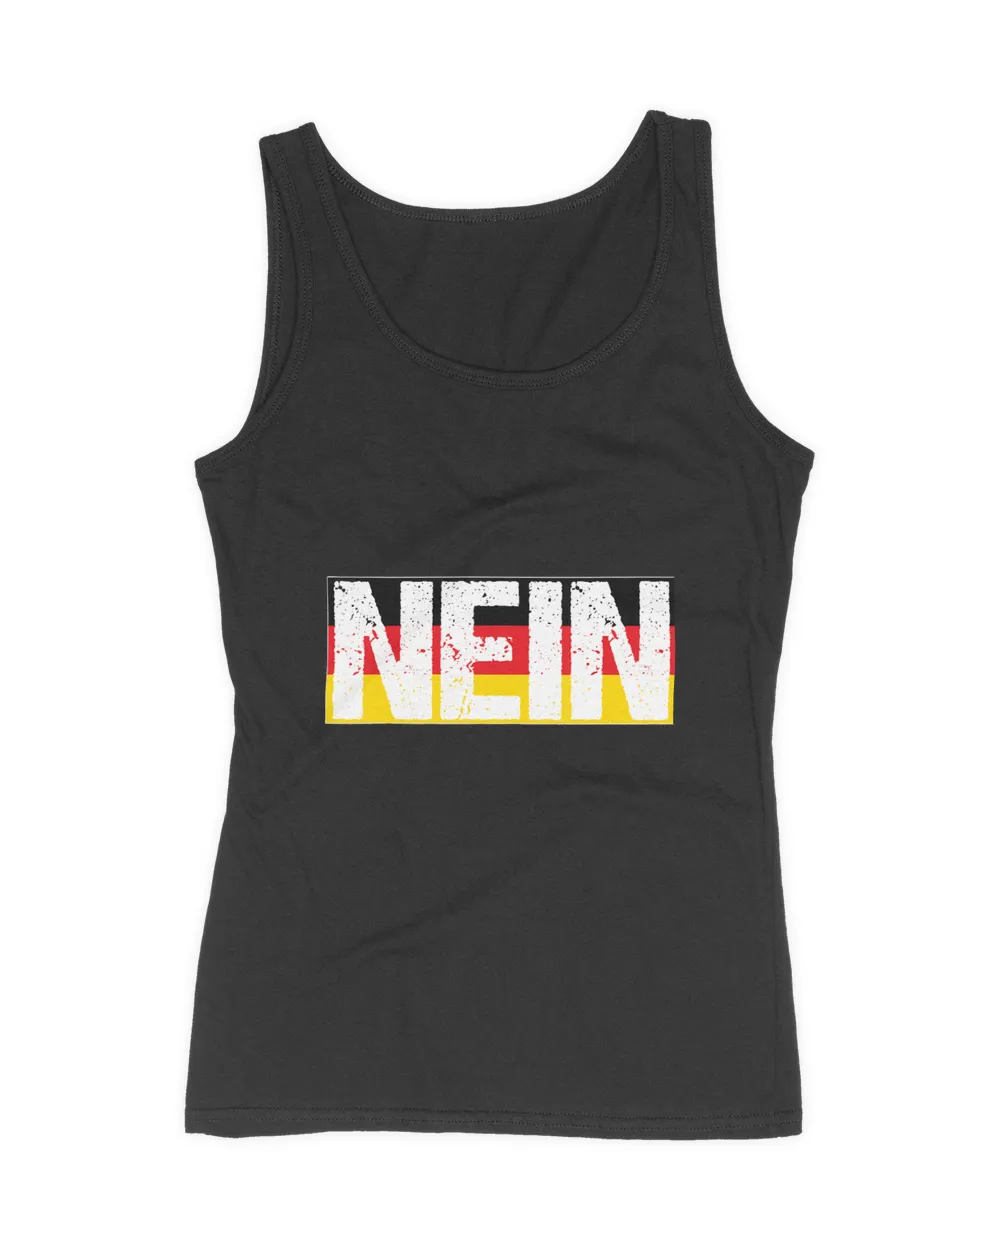 Vintage NEIN Funny German No Saying Germany Gift T-Shirt